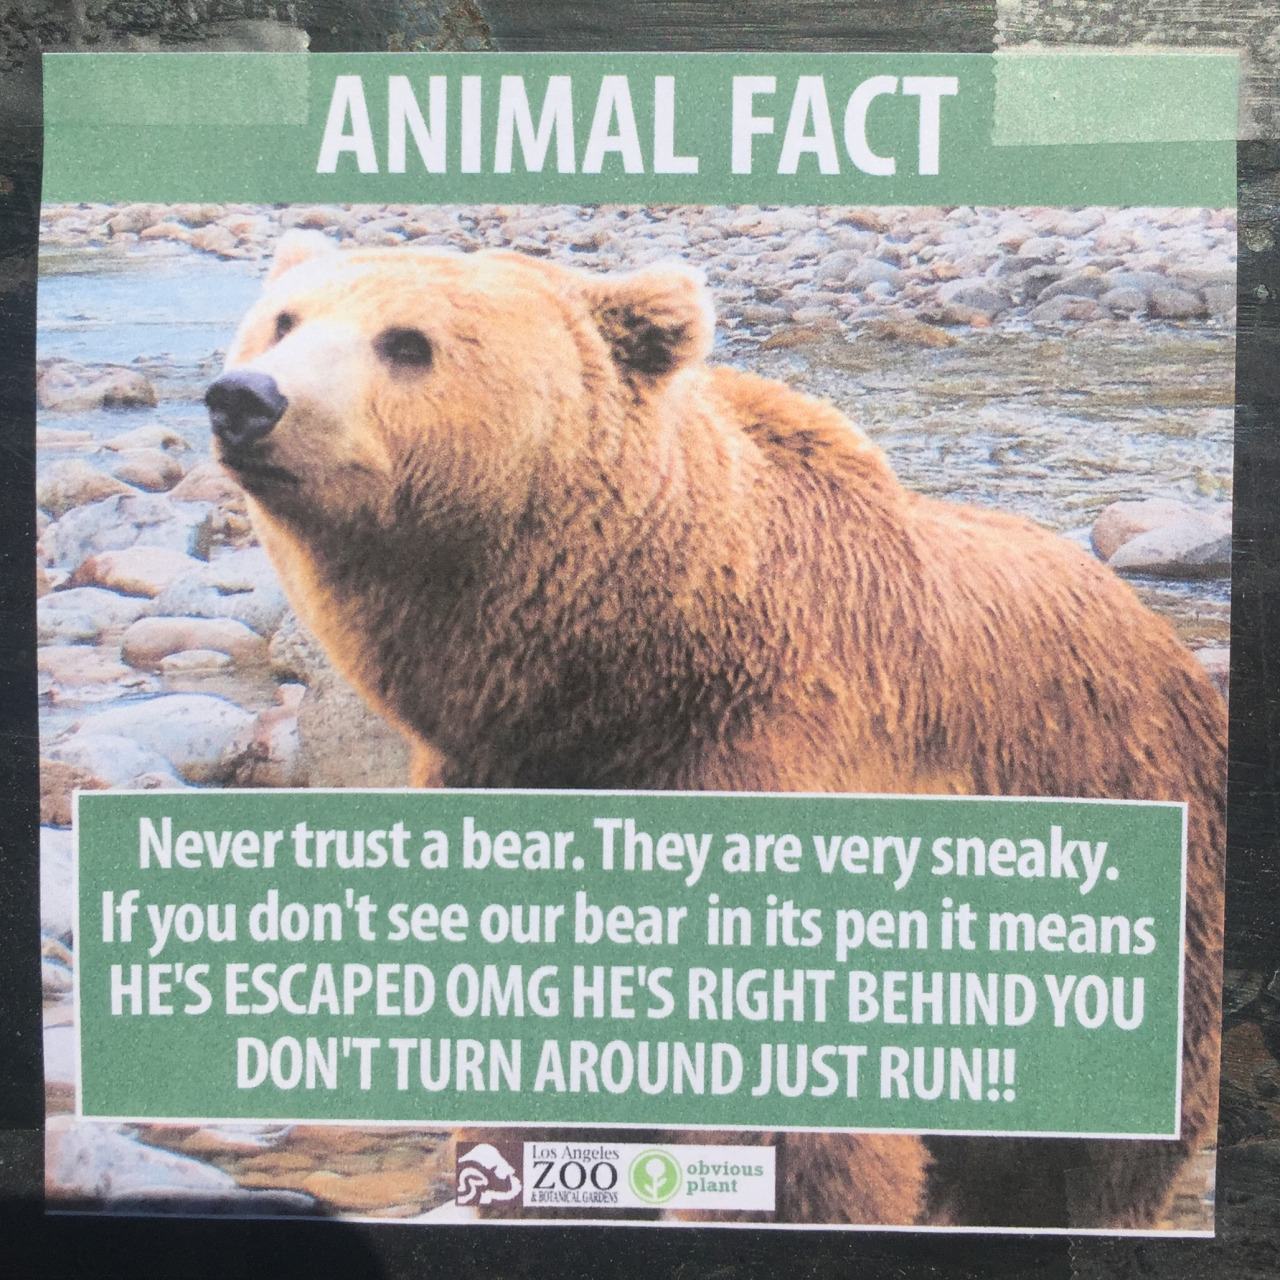 These Fake Animal Facts Were Posted at the Los Angeles Zoo